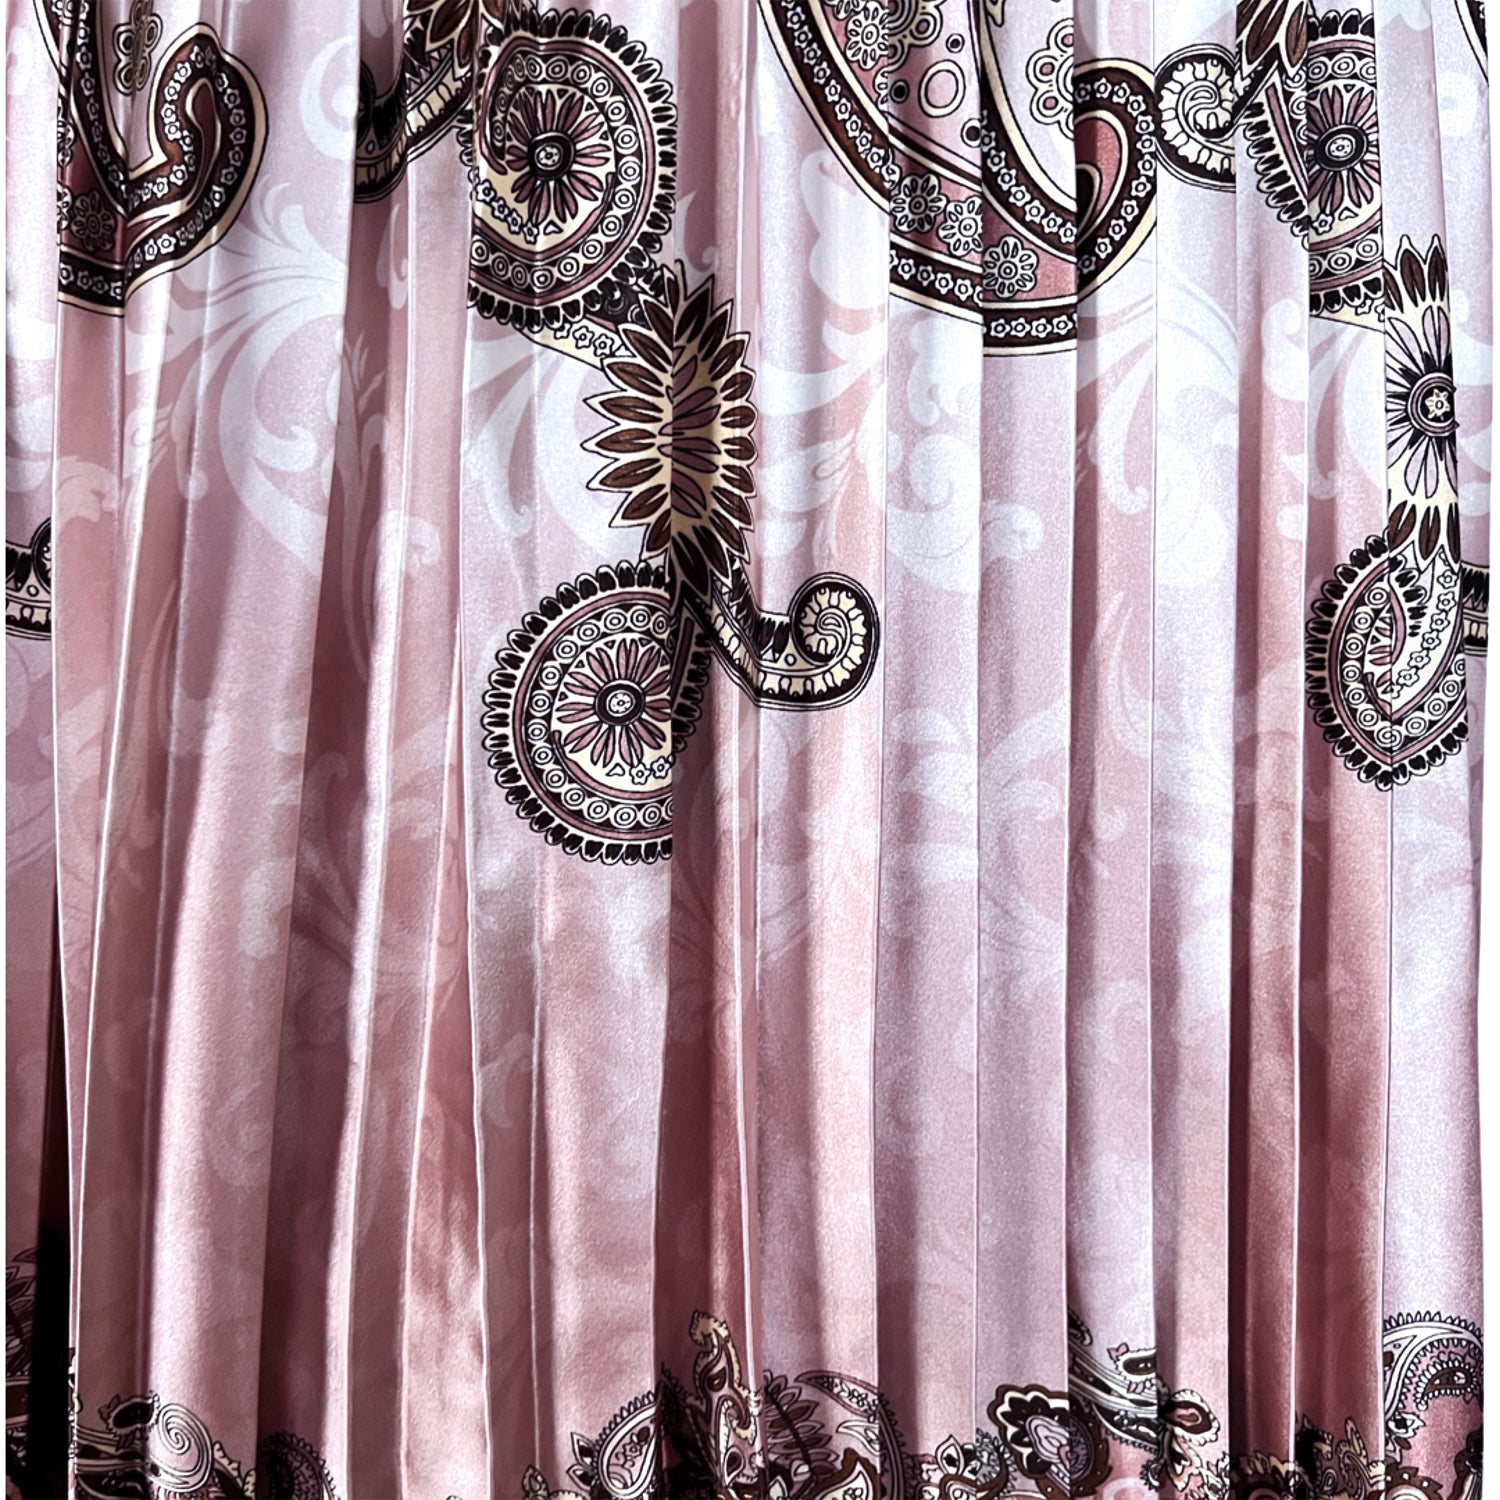 Embroidered Pleated Scarf Midi Skirt in Pink & White